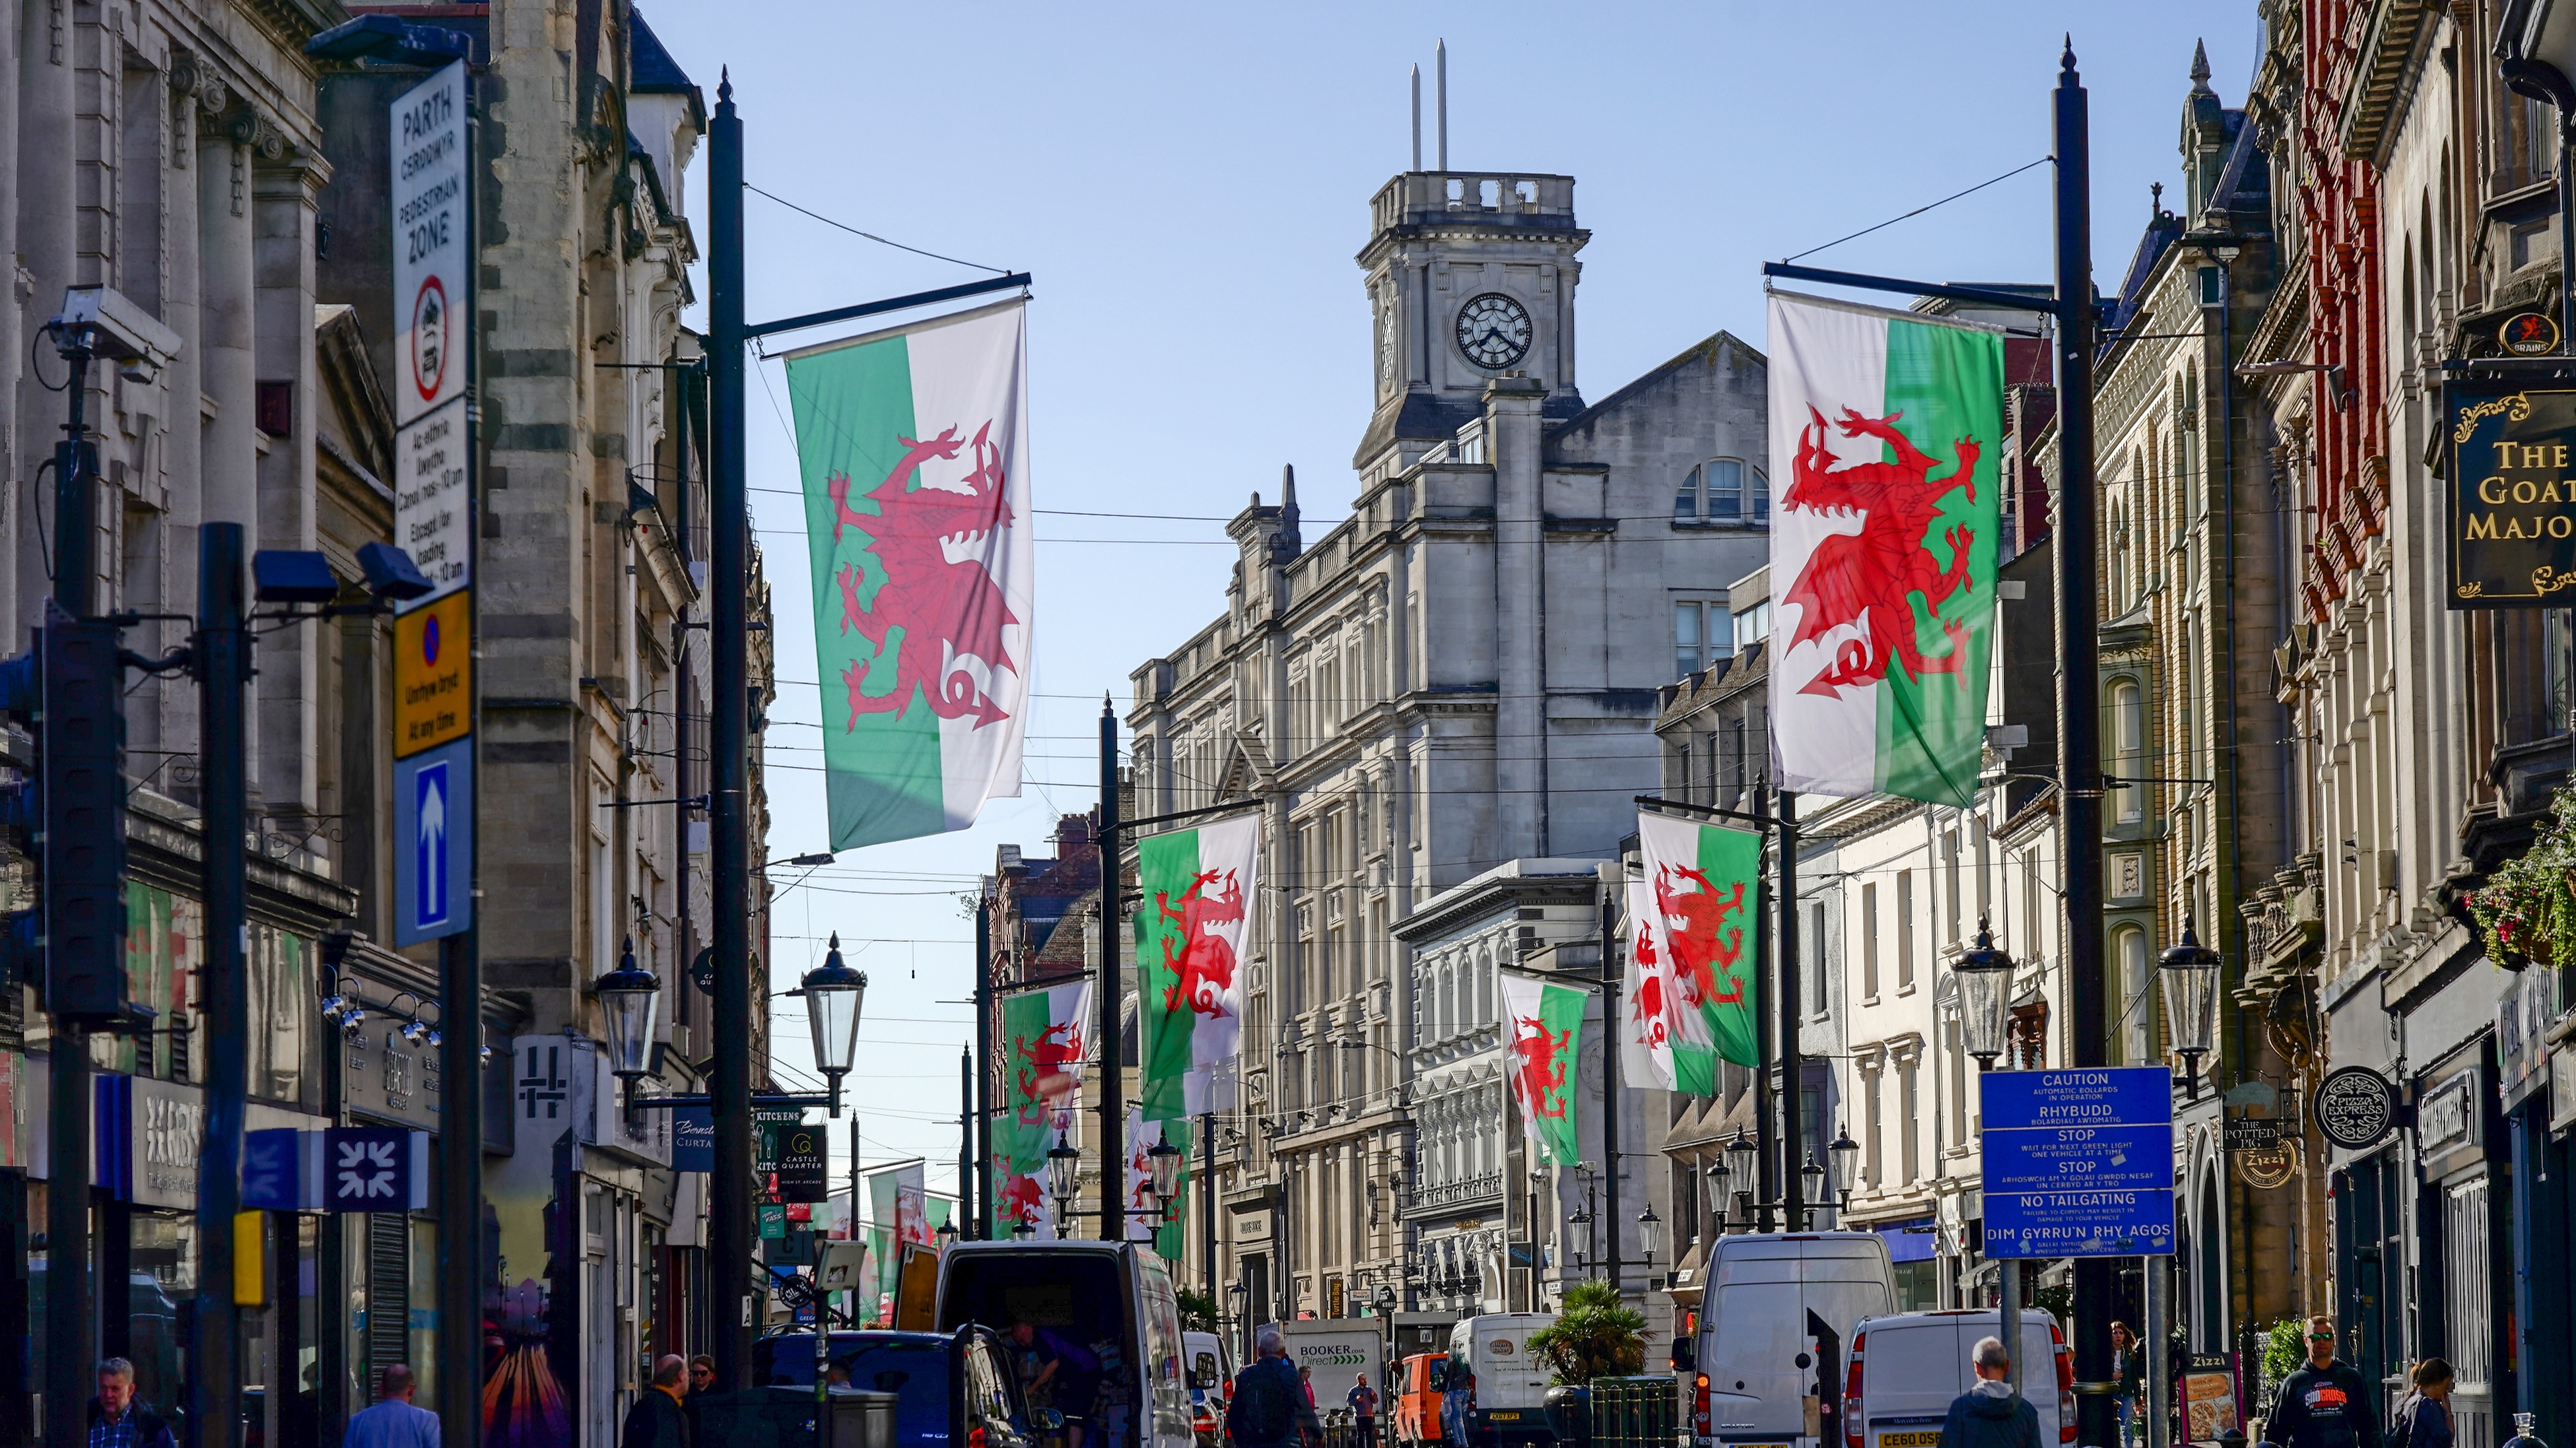 Cardiff Council made £2 million in parking fines in last 12 month